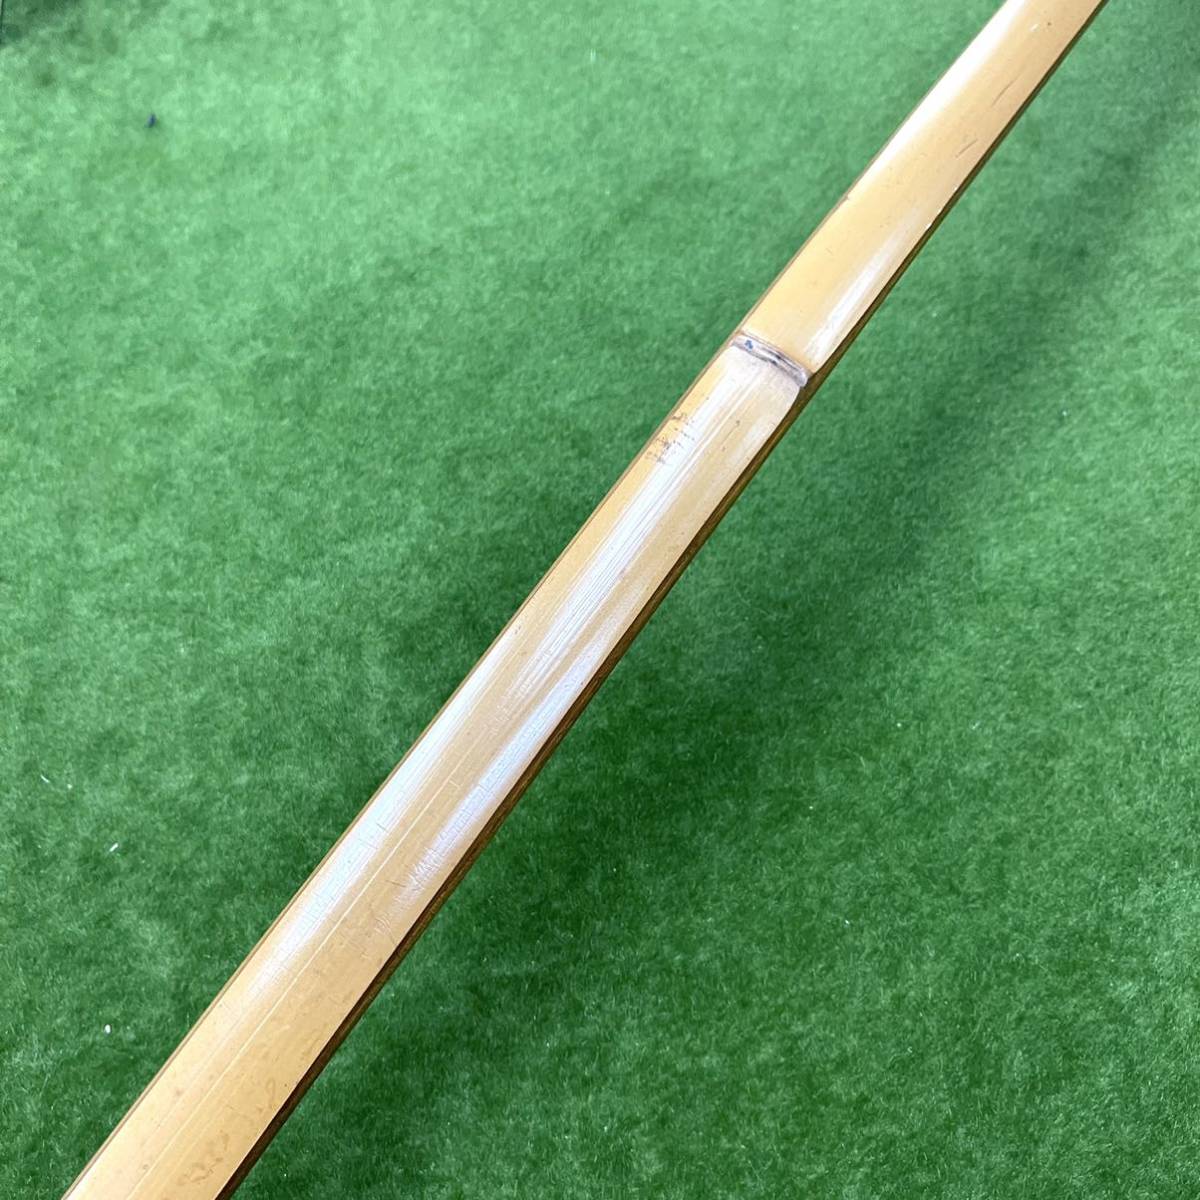 4** archery / archery ./ bow bamboo bow Zaimei :. arrow total length : approximately 217.5cm/ curve : approximately 212cm**